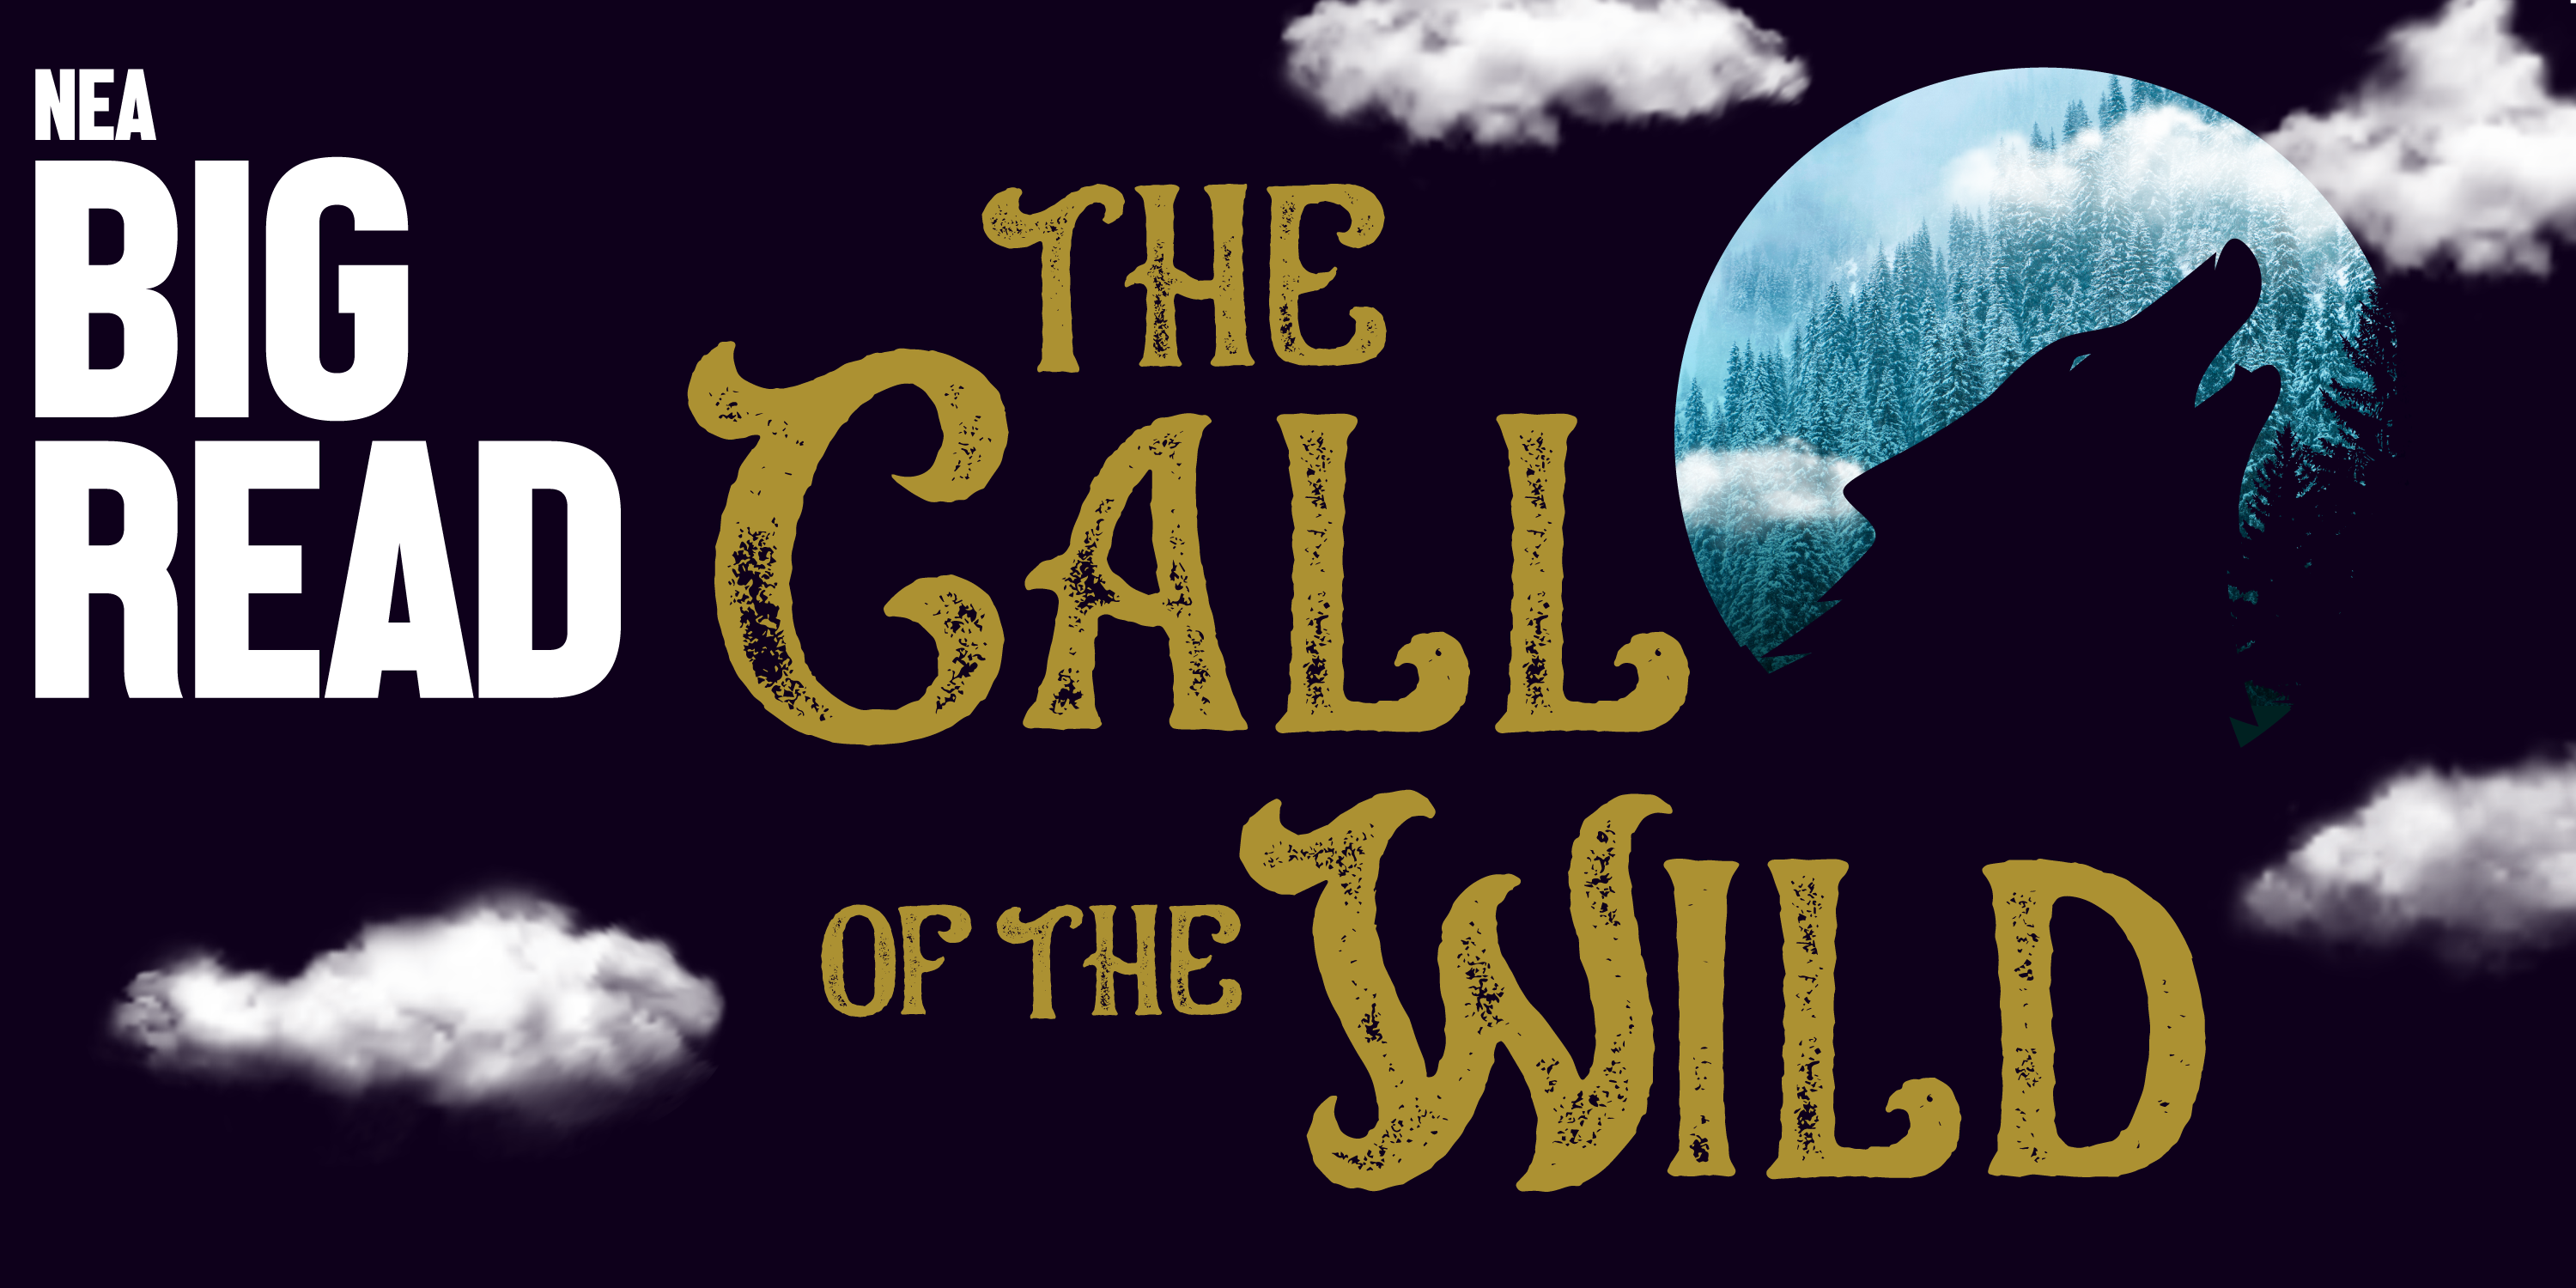 The 2022 NEA Big Read is Jack London’s The Call of the Wild